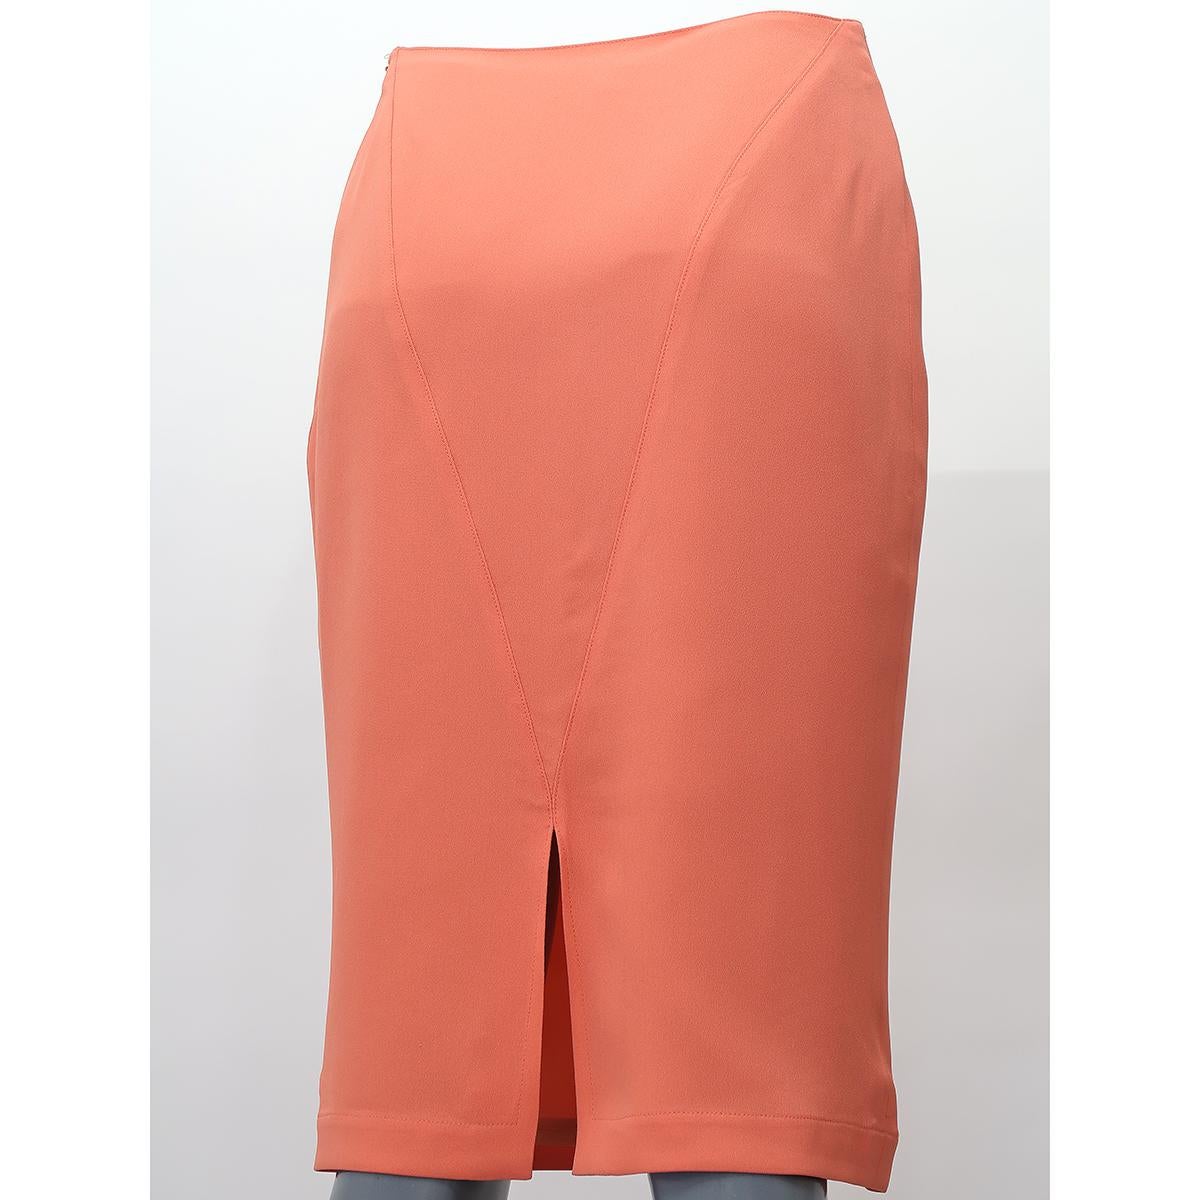 Thierry Mugler COUTURE Silk & Acetate Salmon Skirt In Excellent Condition For Sale In Brussels, BE